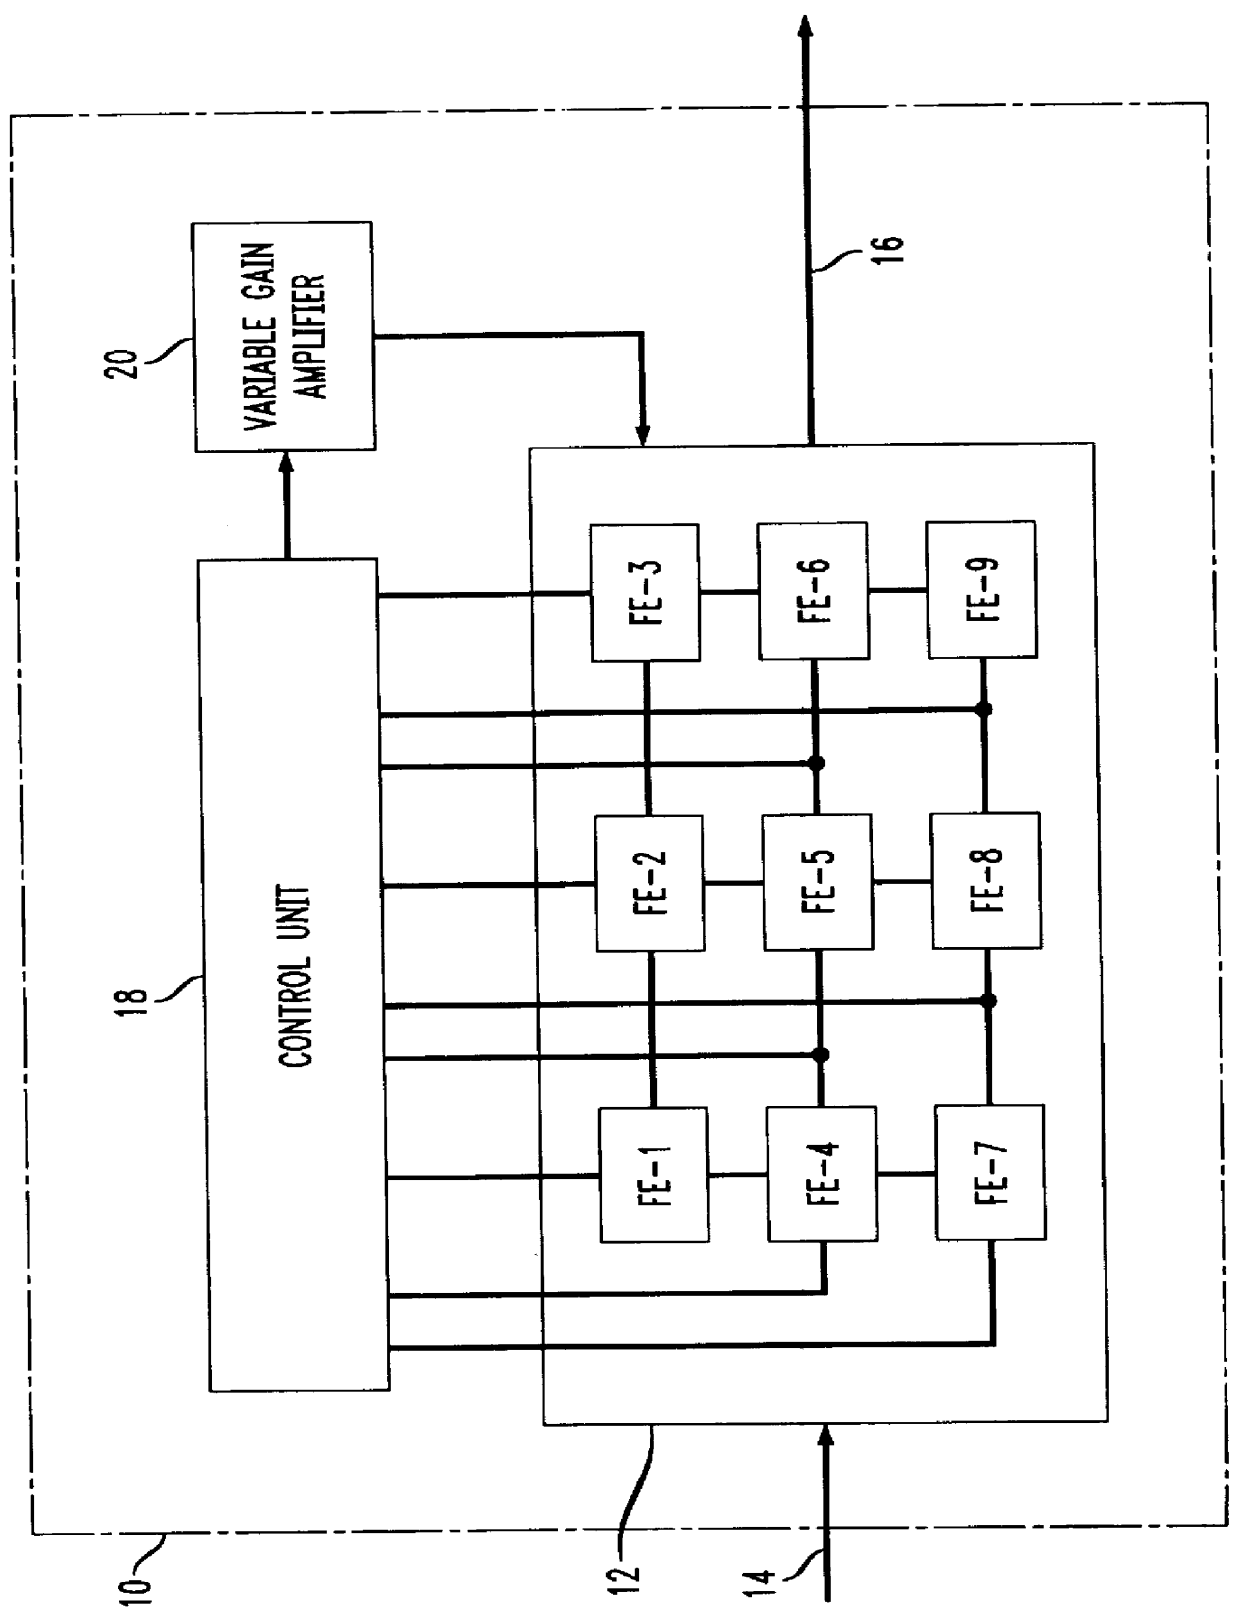 Programmable filter bank having notch filter and bandpass filter frequency responses